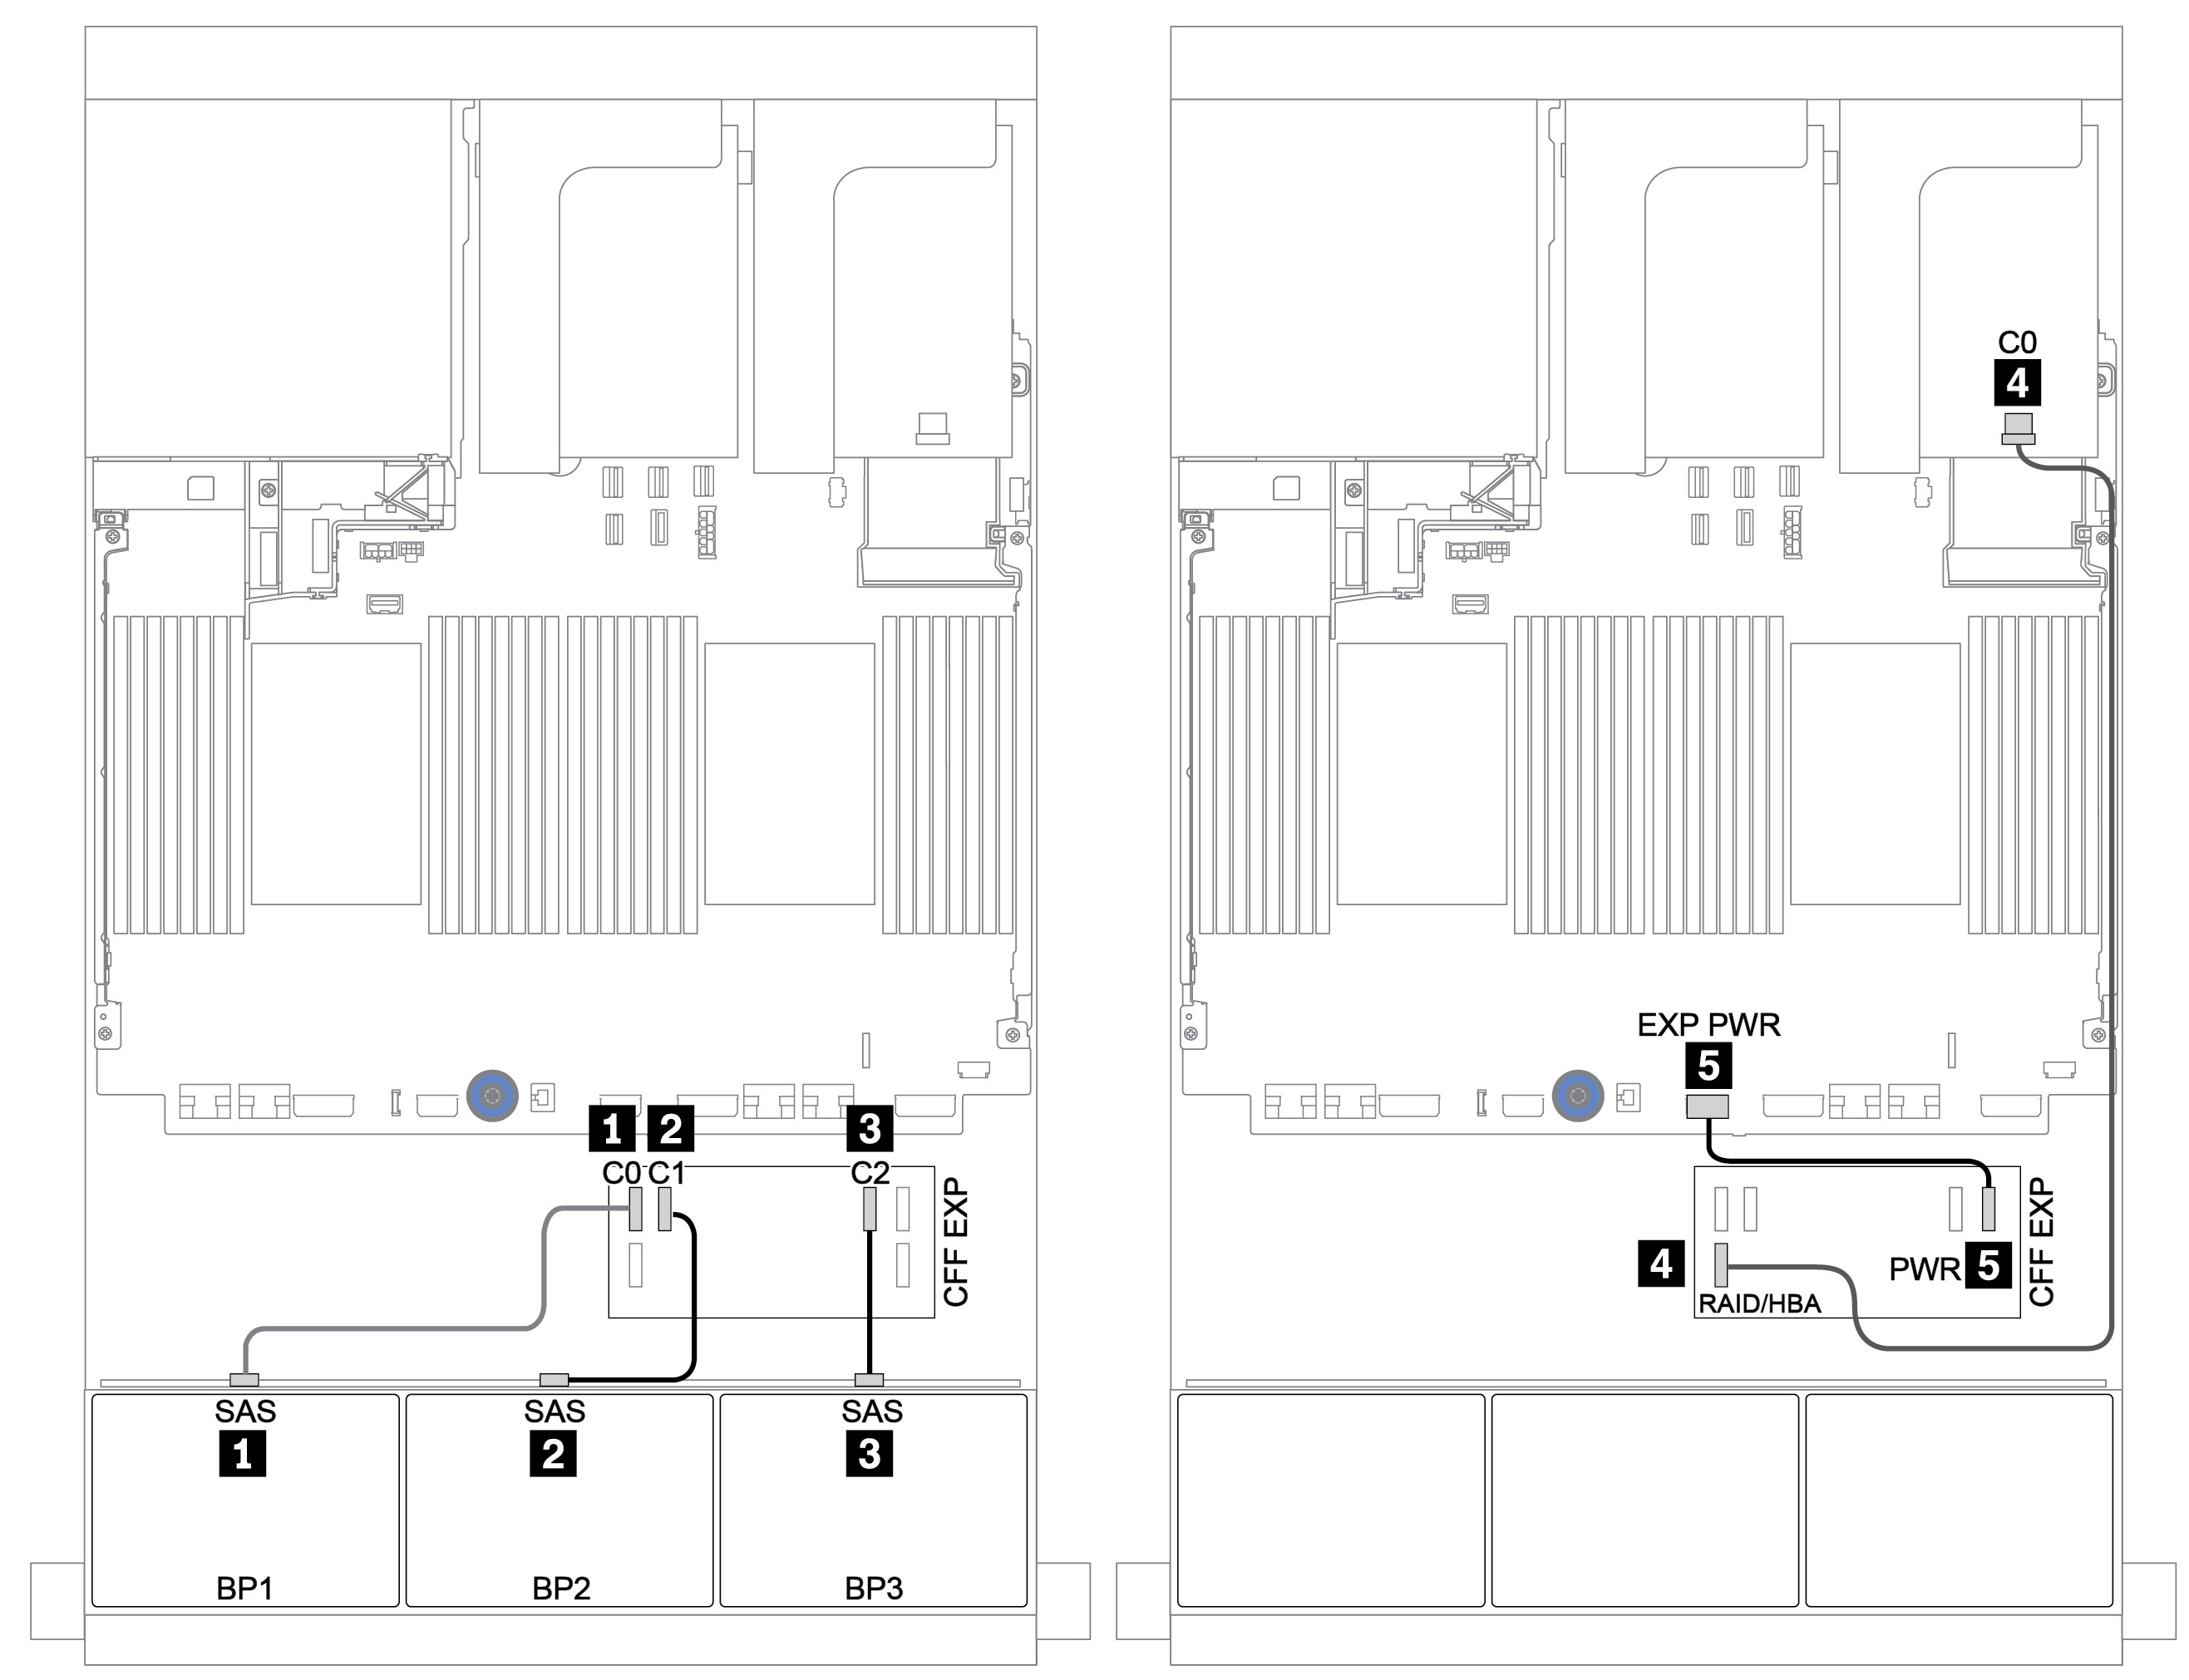 Cable routing for the 24 x 2.5-inch SAS/SATA configuration with one CFF expander and one 8i RAID/HBA adapter